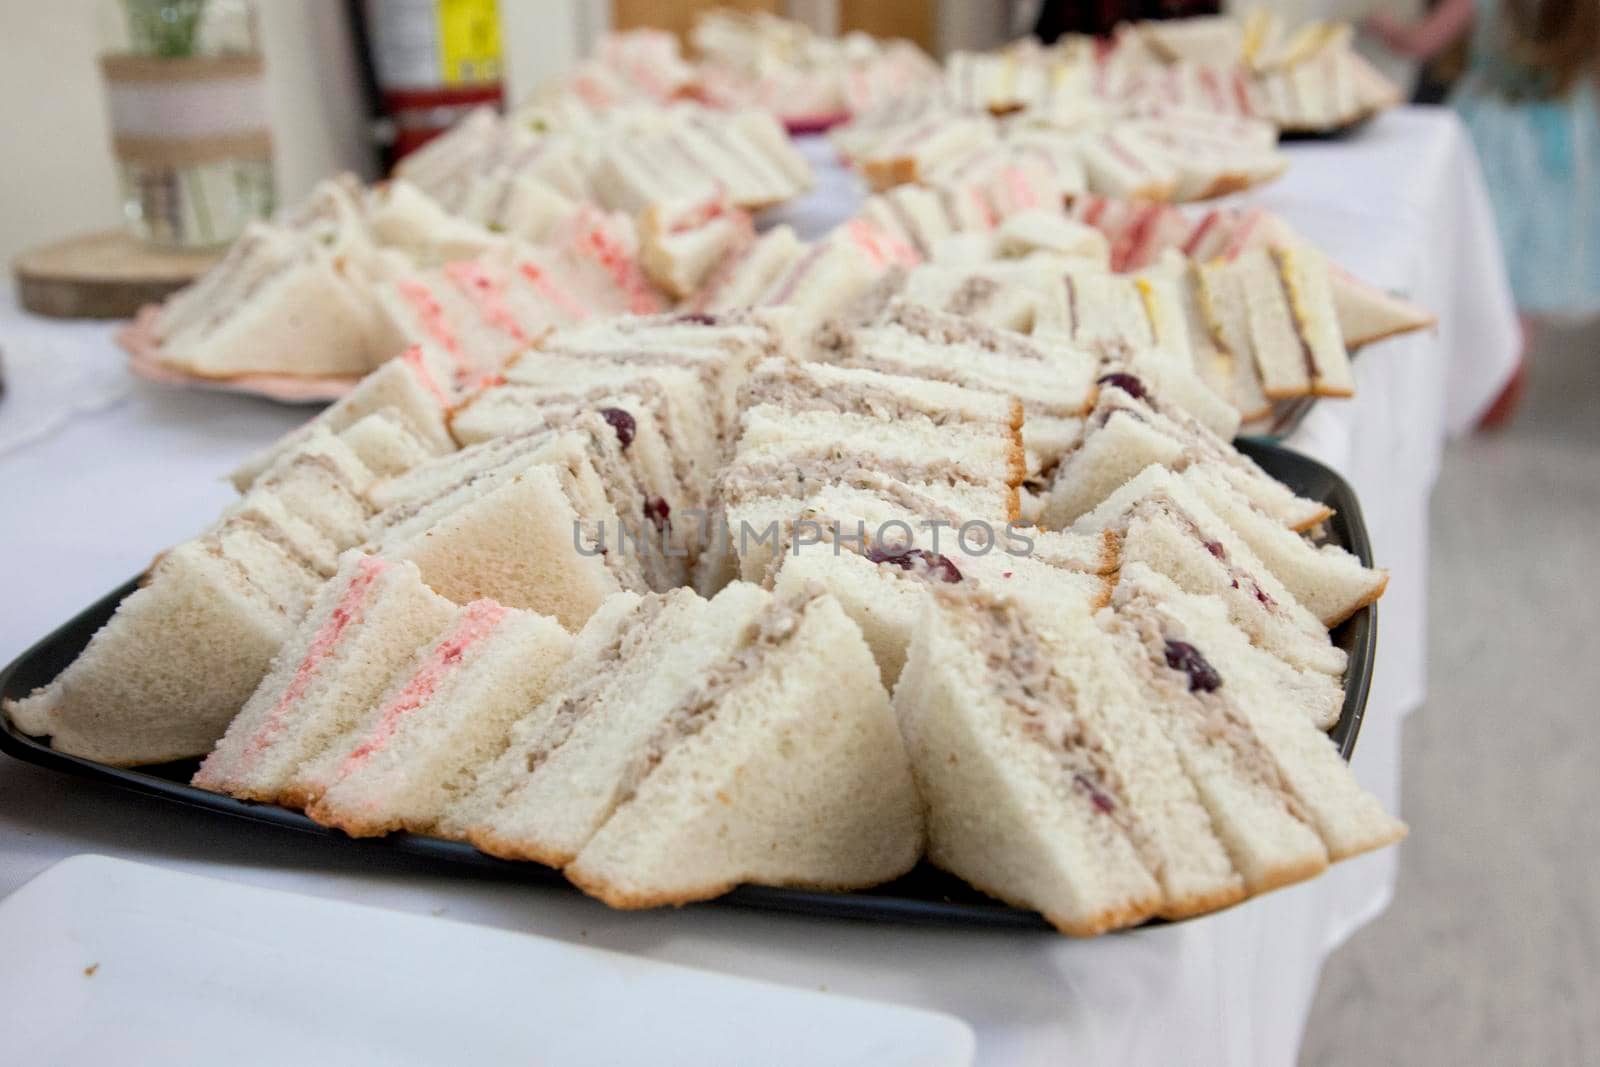 Delicious assortment of finger sandwiches at a function or party 